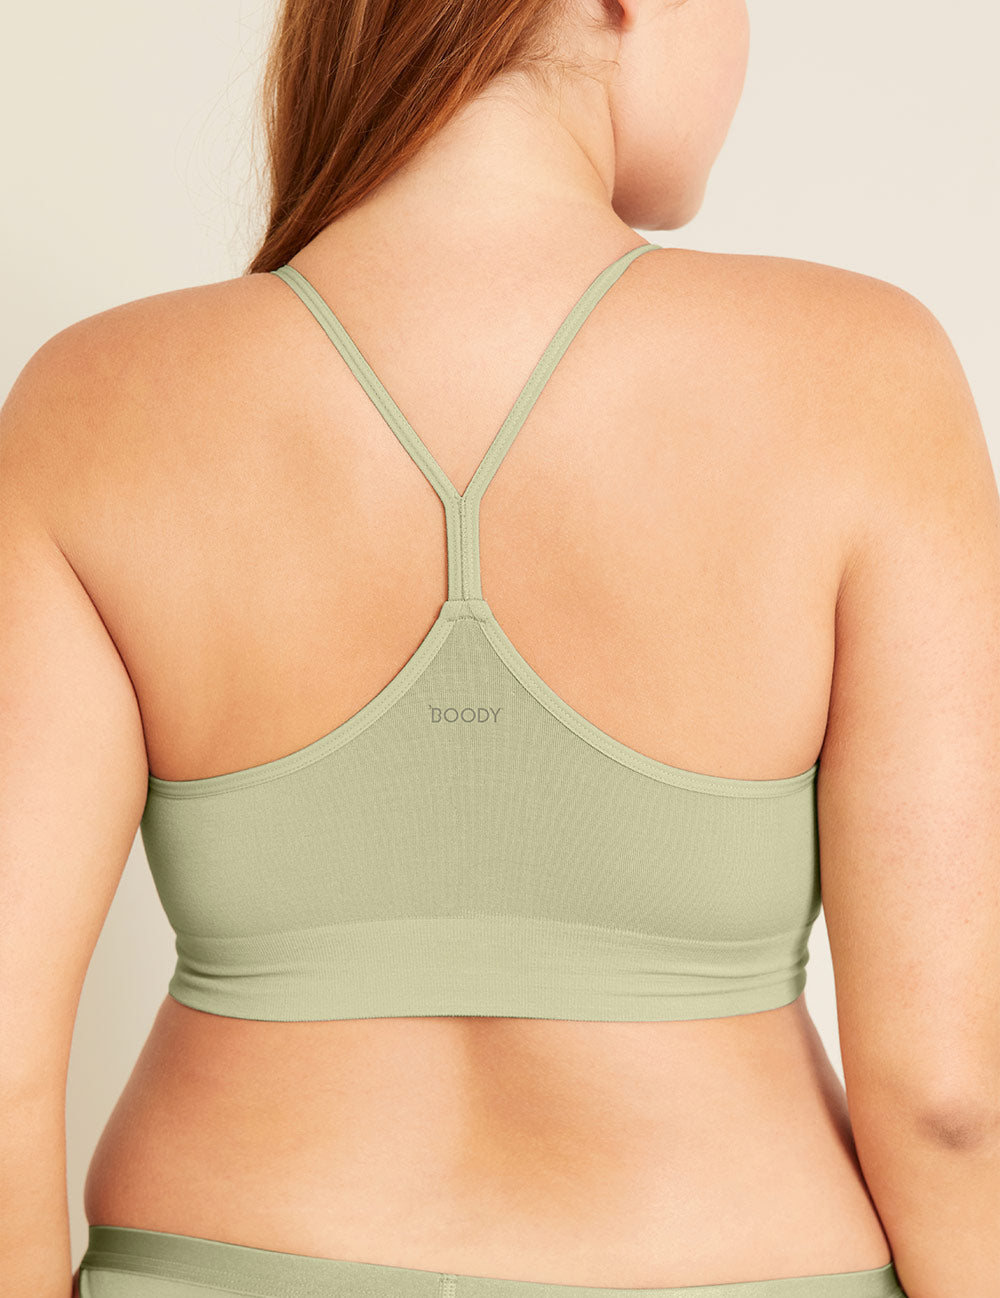 Boody Bamboo Lyocell Racerback Bra with matching underwear in Sage Green Detail Back View